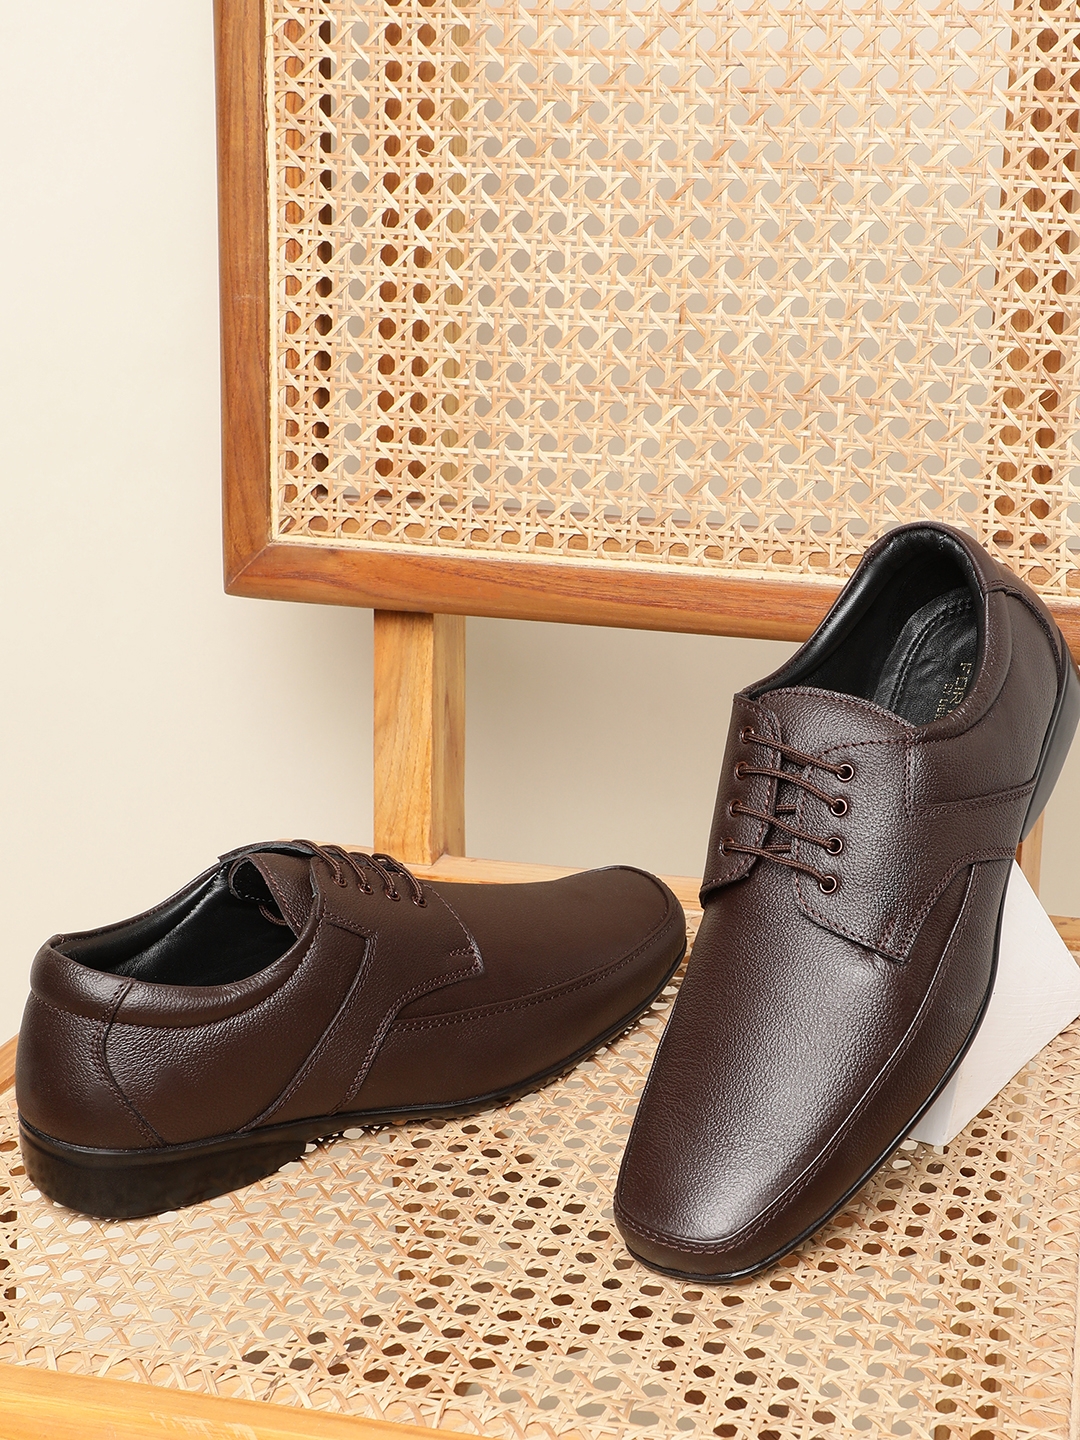 Men'S Fortune Brown Derby Shoes